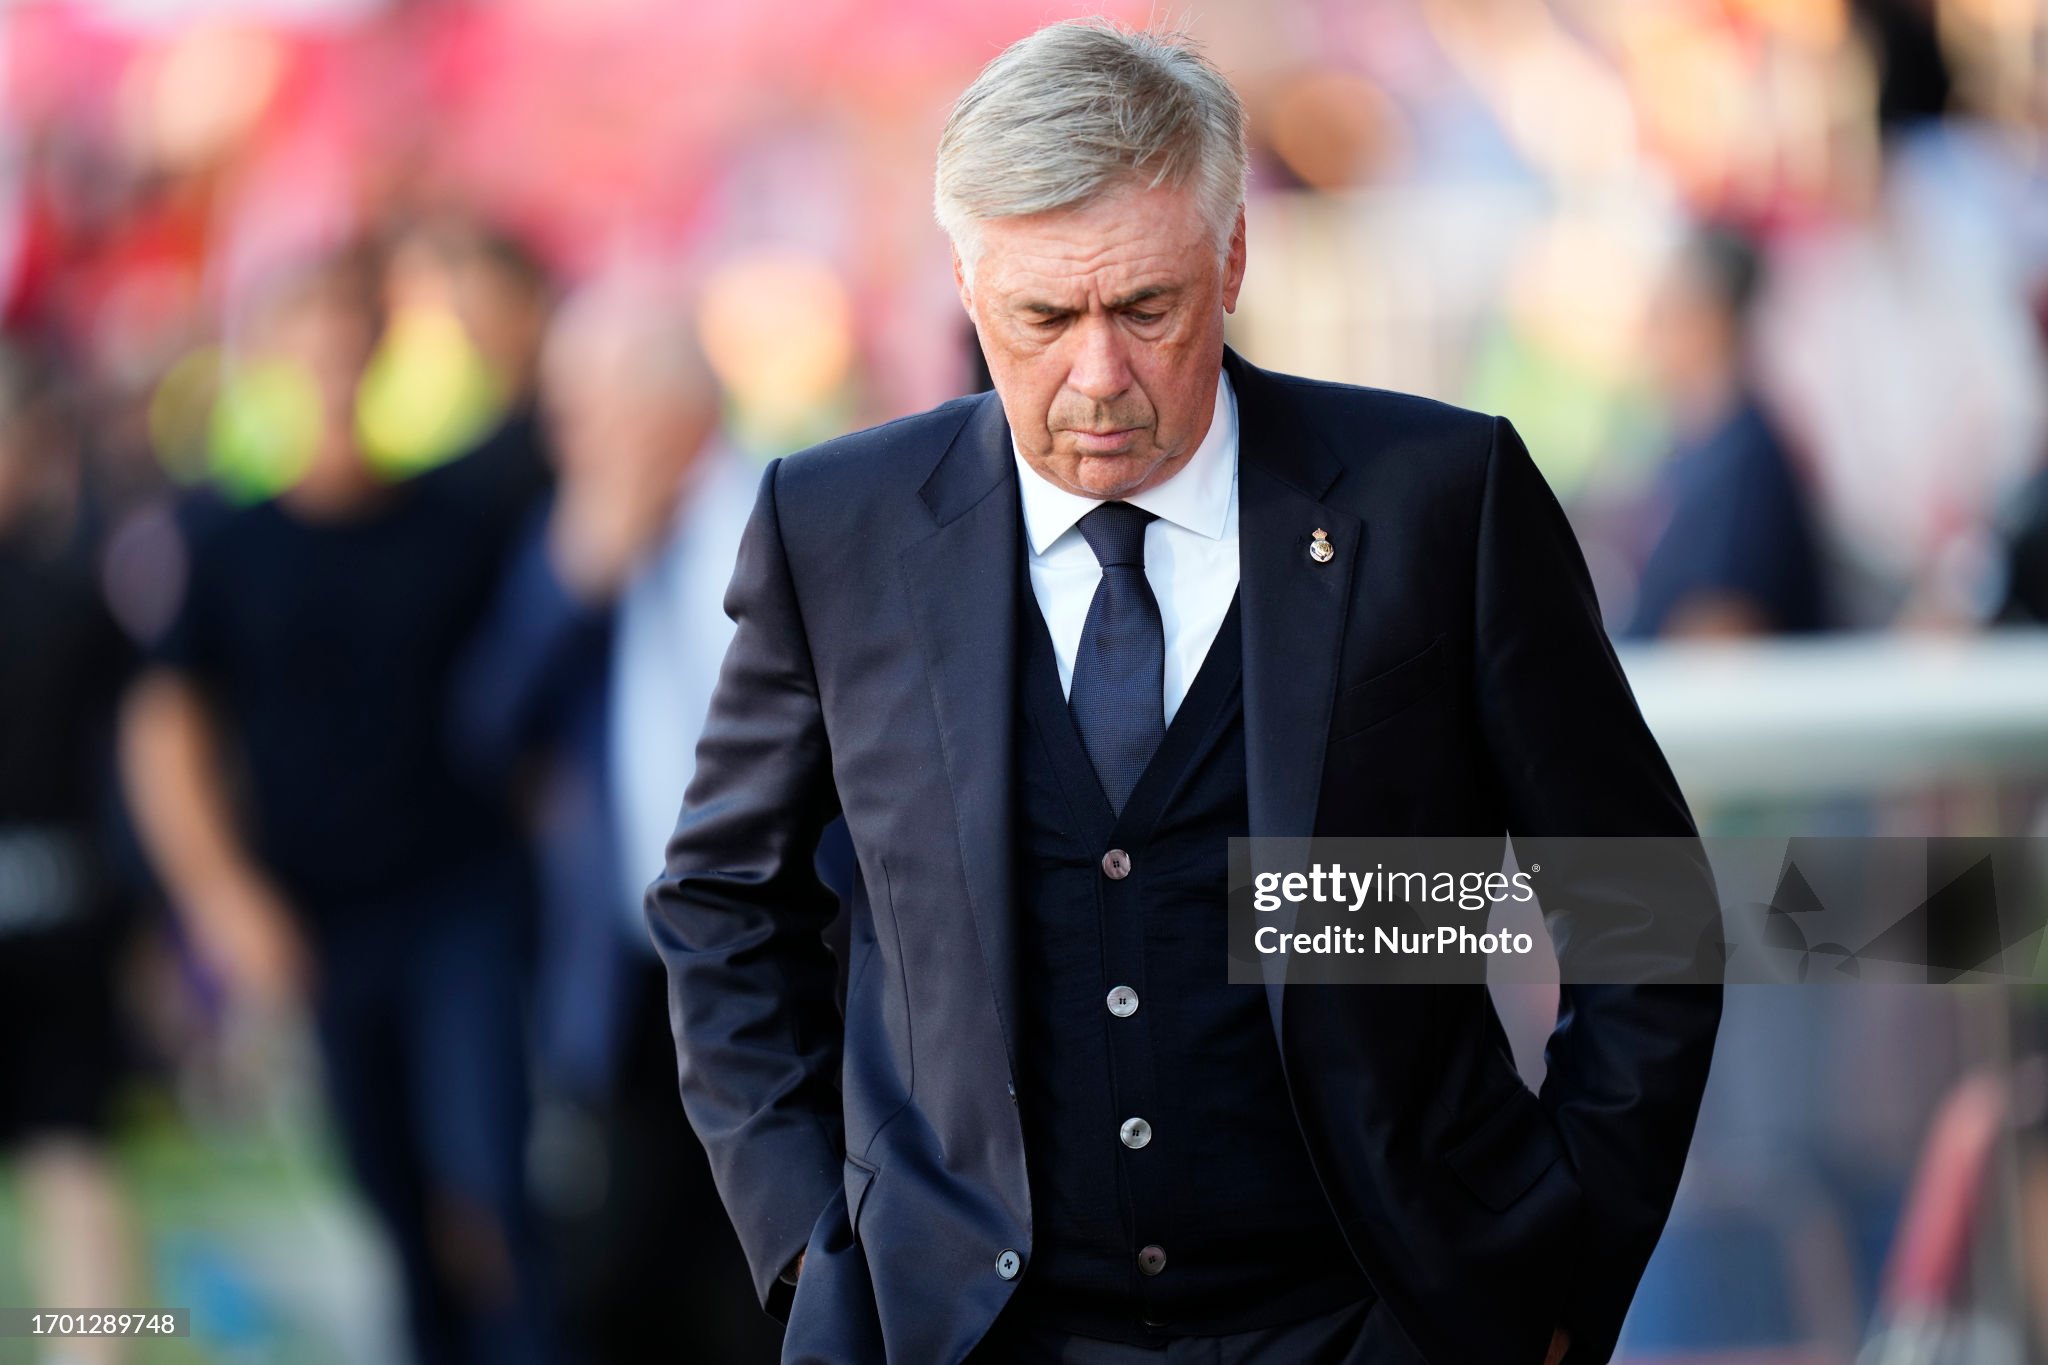 Ancelotti: 'I asked him, and he prefers the wing to the bench'